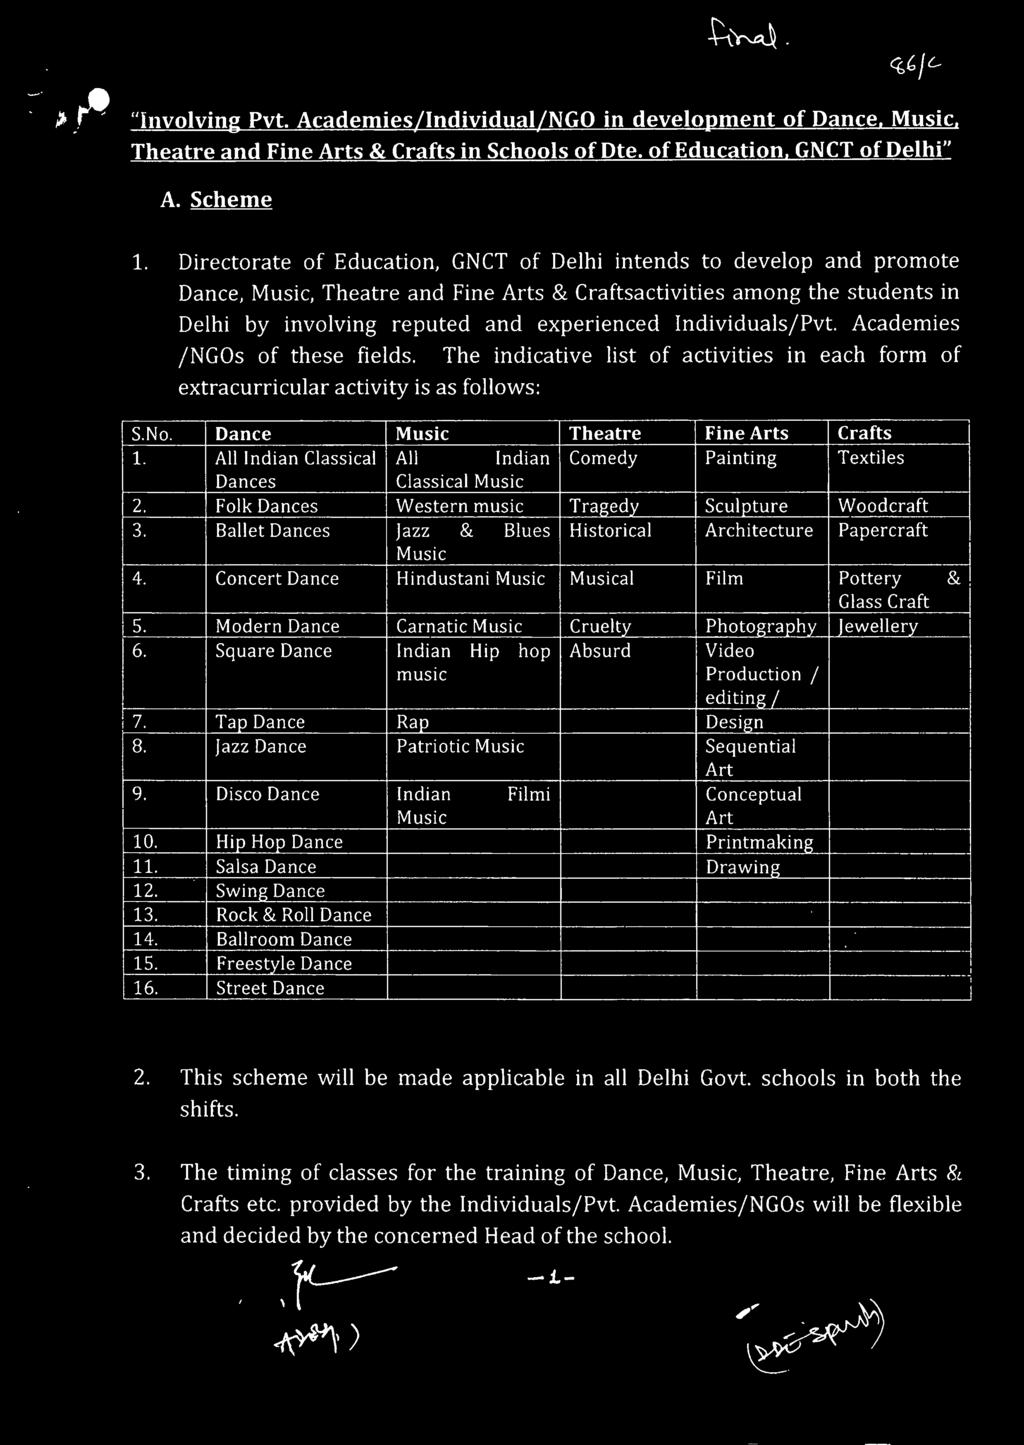 Individuals/Pvt. Academies /NGOs of these fields. The indicative list of activities in each form of extracurricular activity is as follows: S.No. Dance Music Theatre Fine Arts Crafts 1.